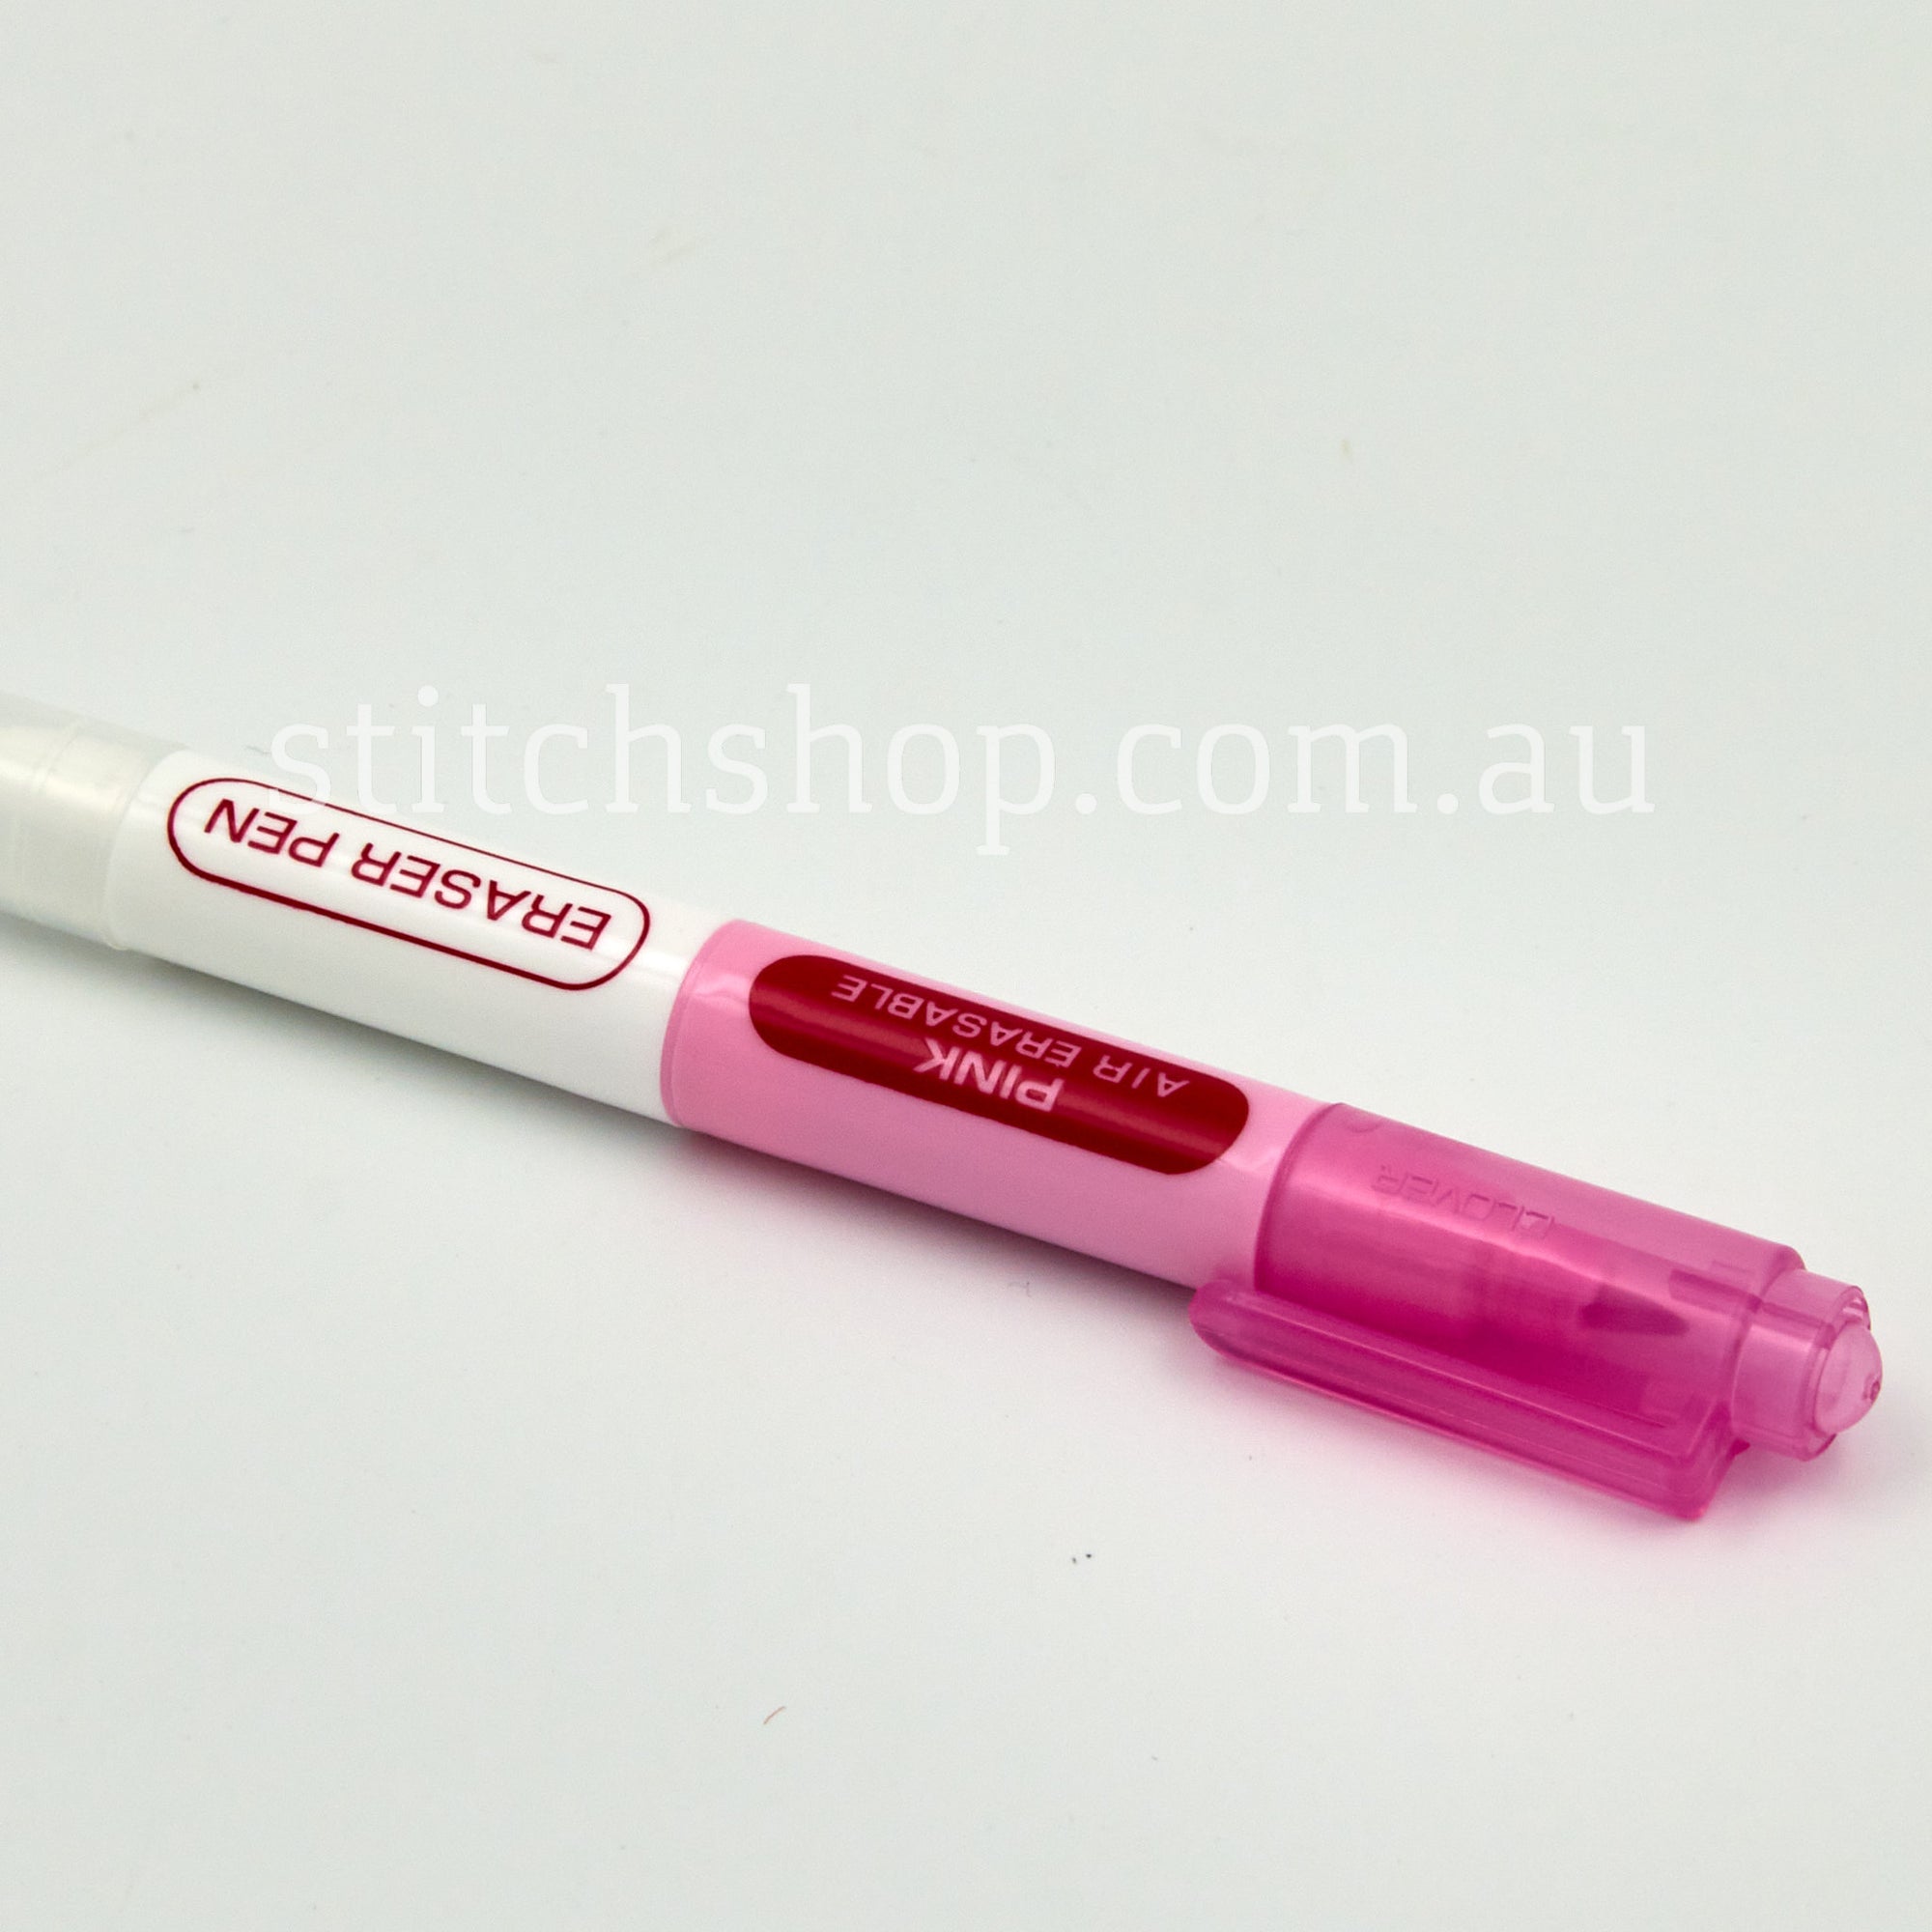 Chacopen Pink with Eraser (air erasable) - Pink (051221523182)